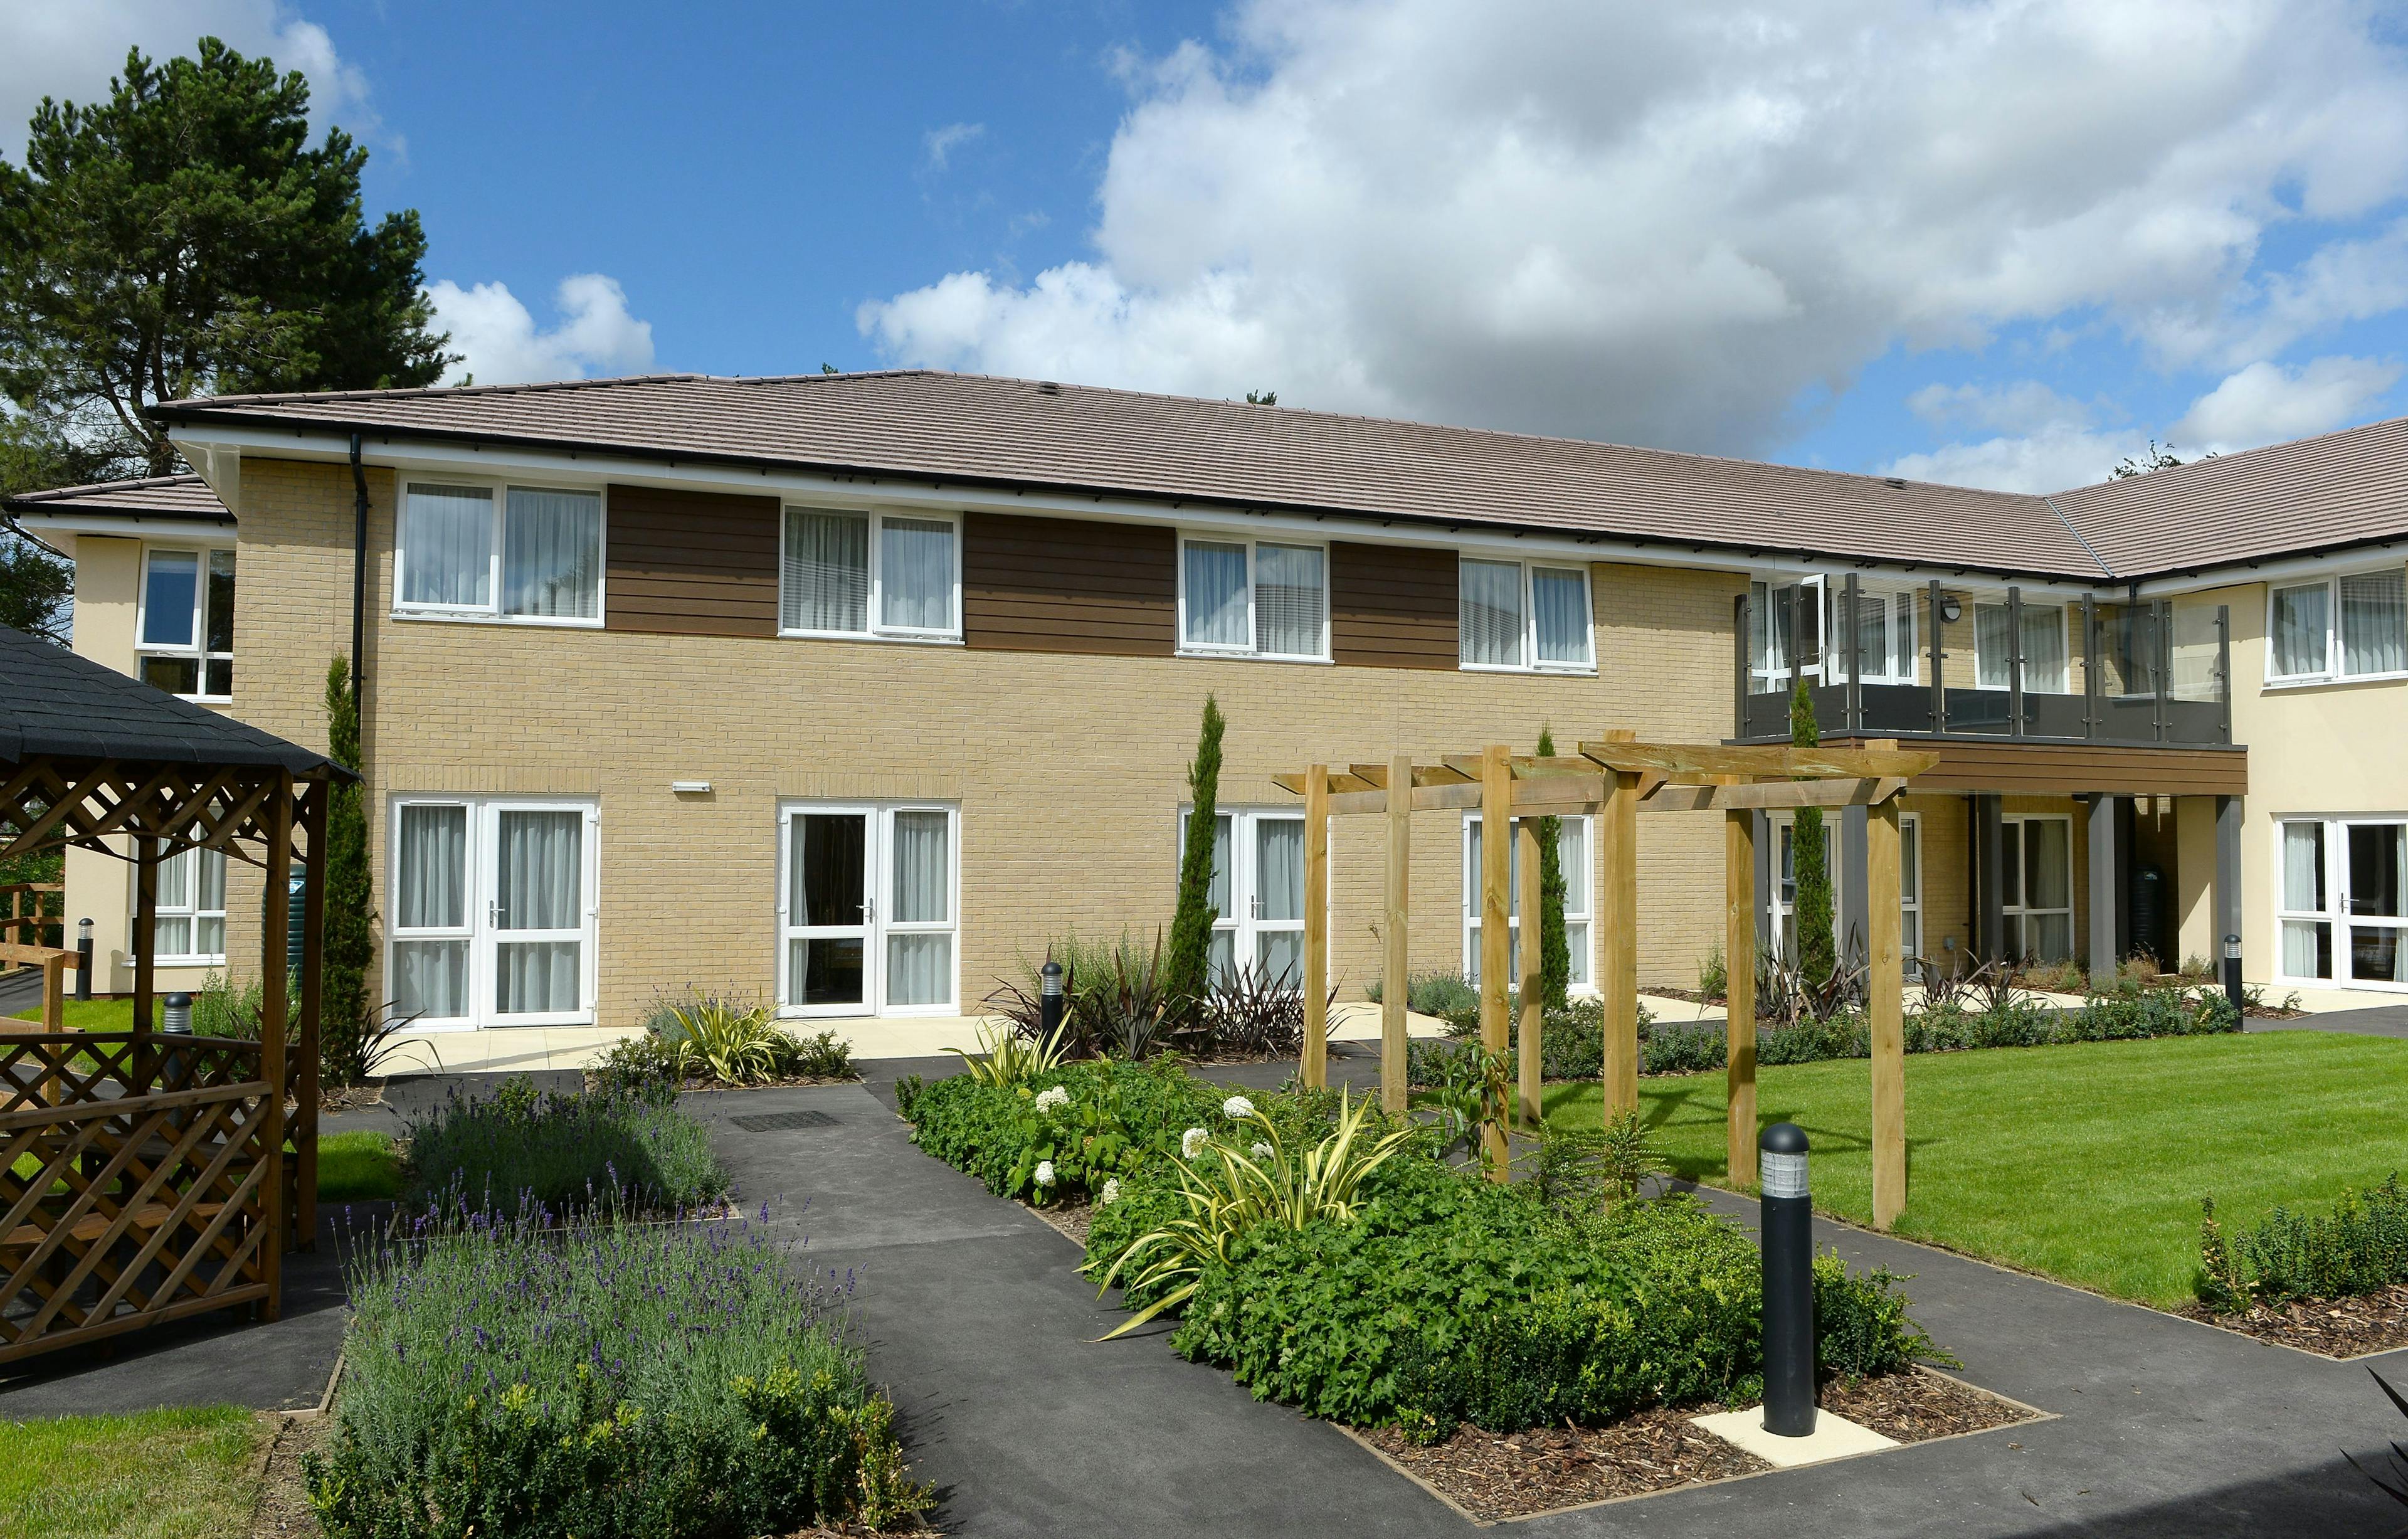 Care UK - Davers Court care home 13